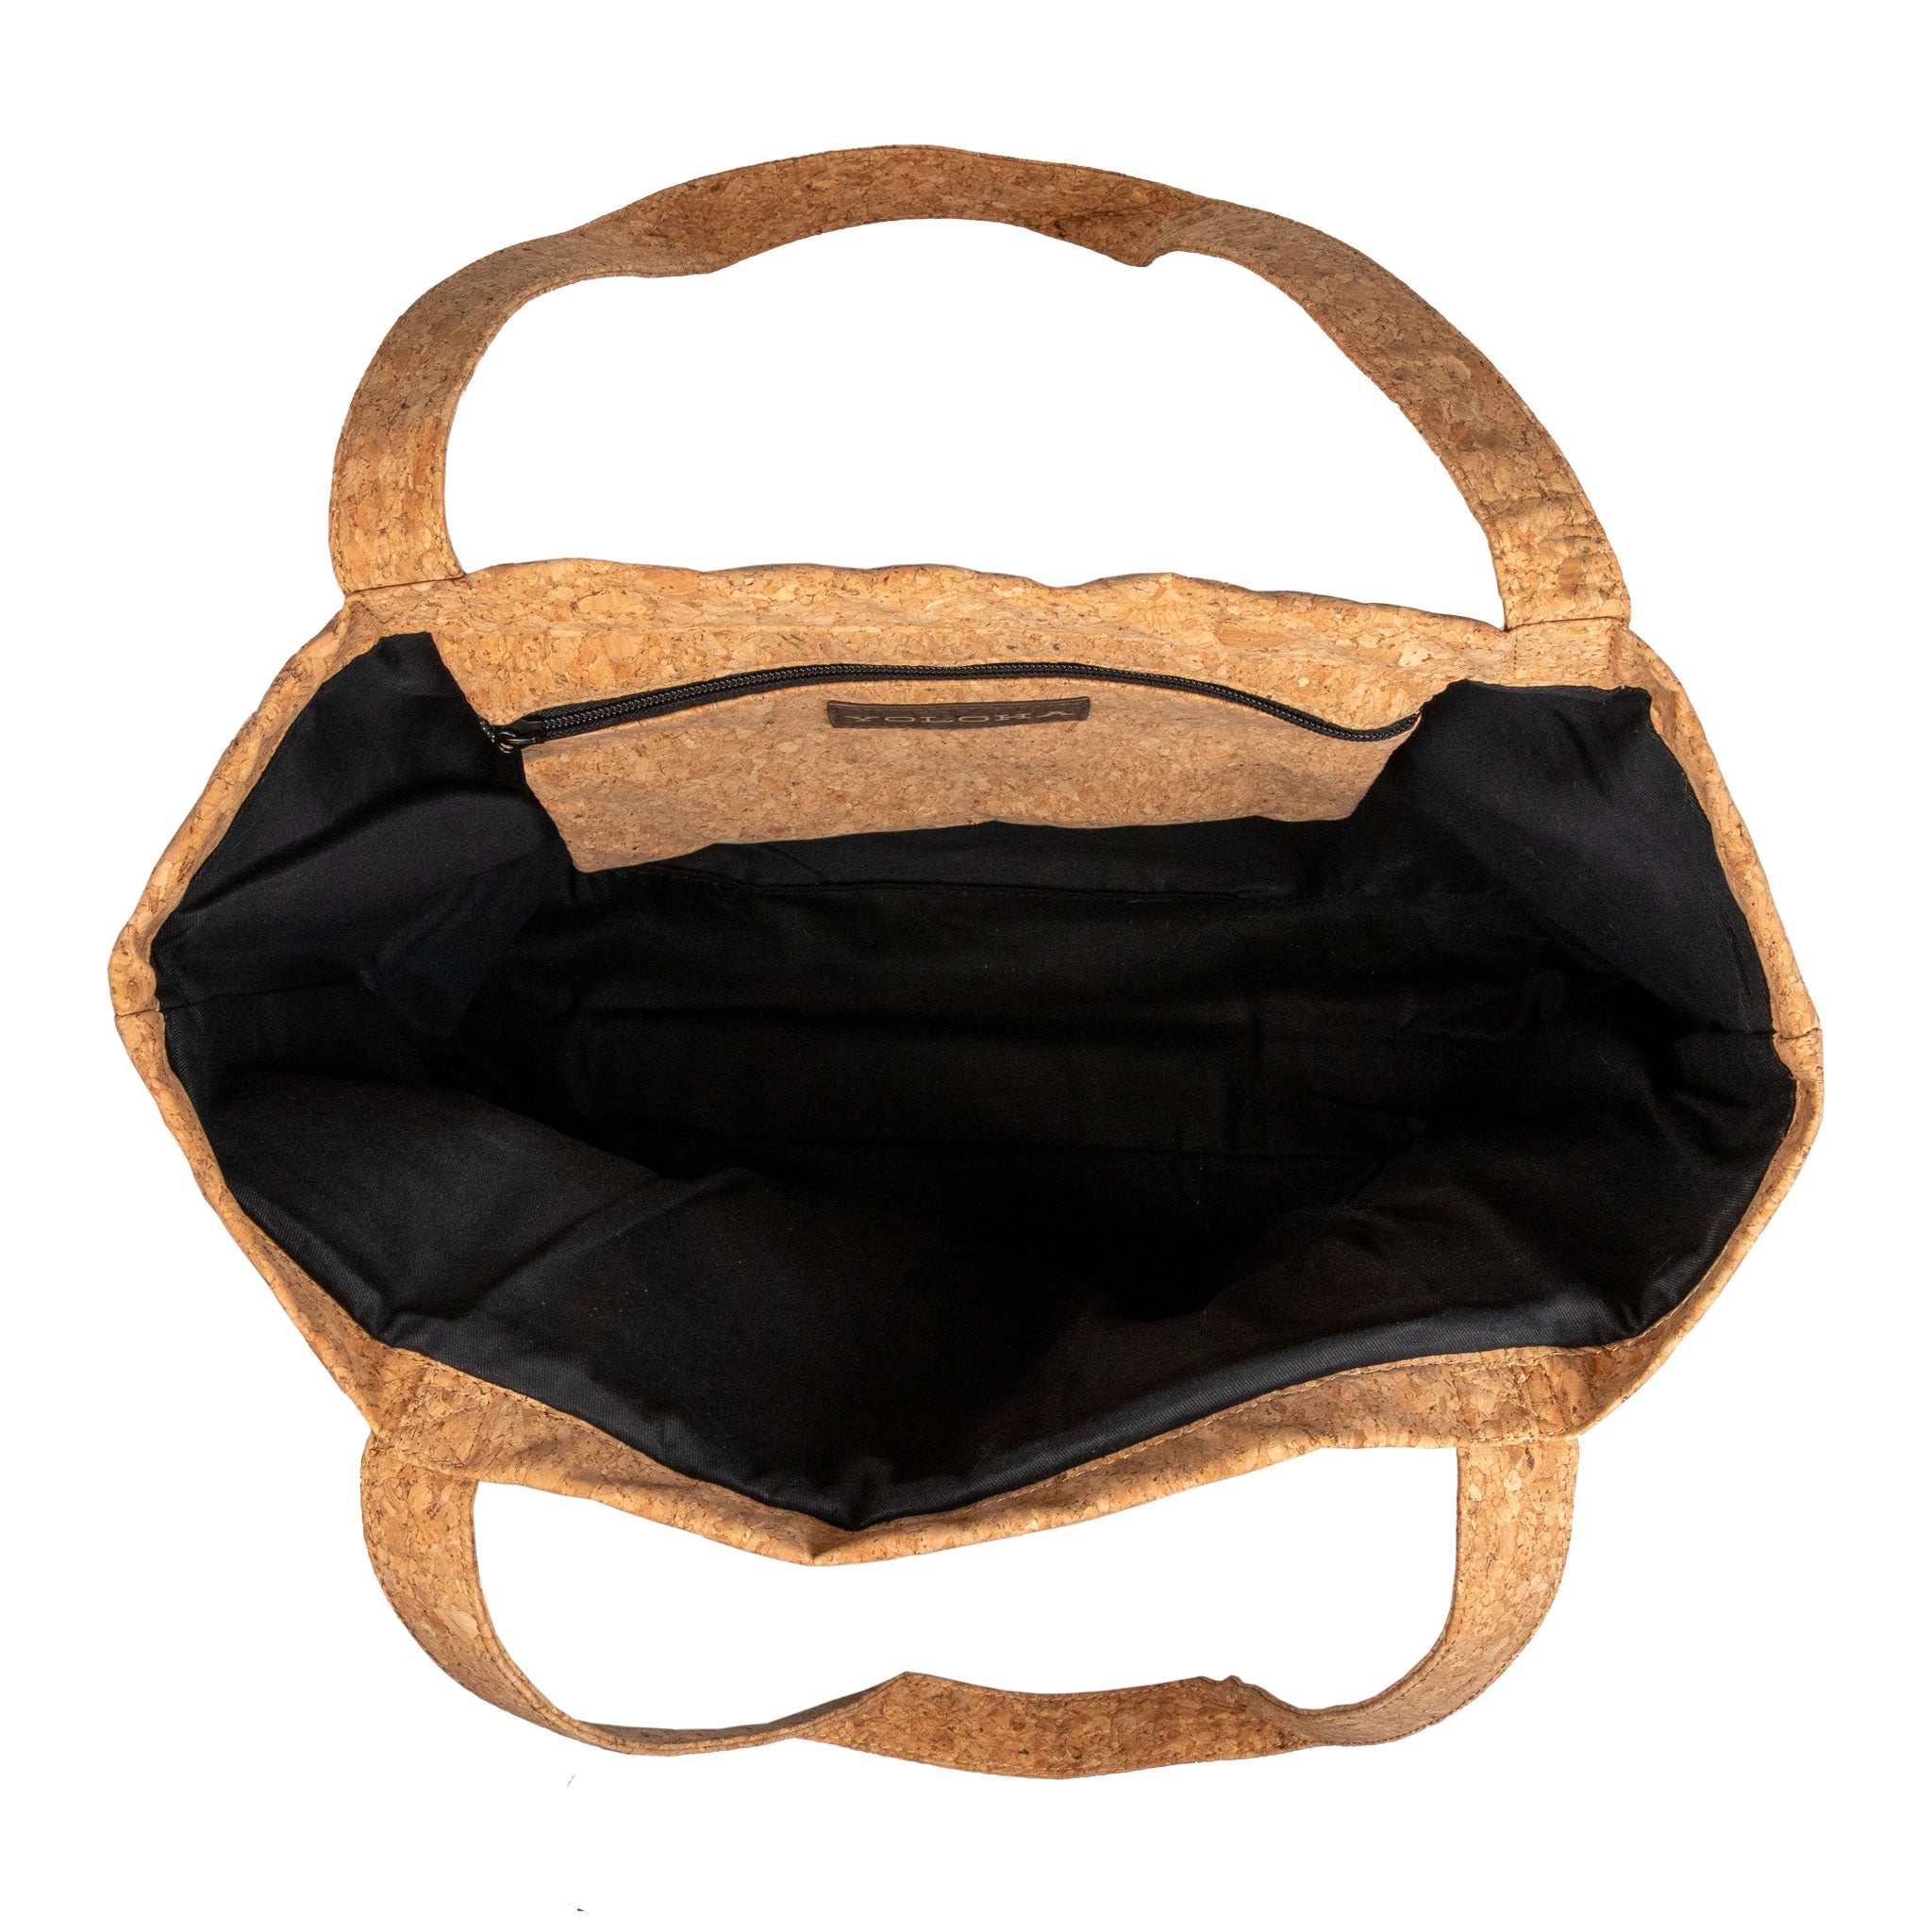 The Best Natural Cork Tote Bag with Yoga Mat Holder